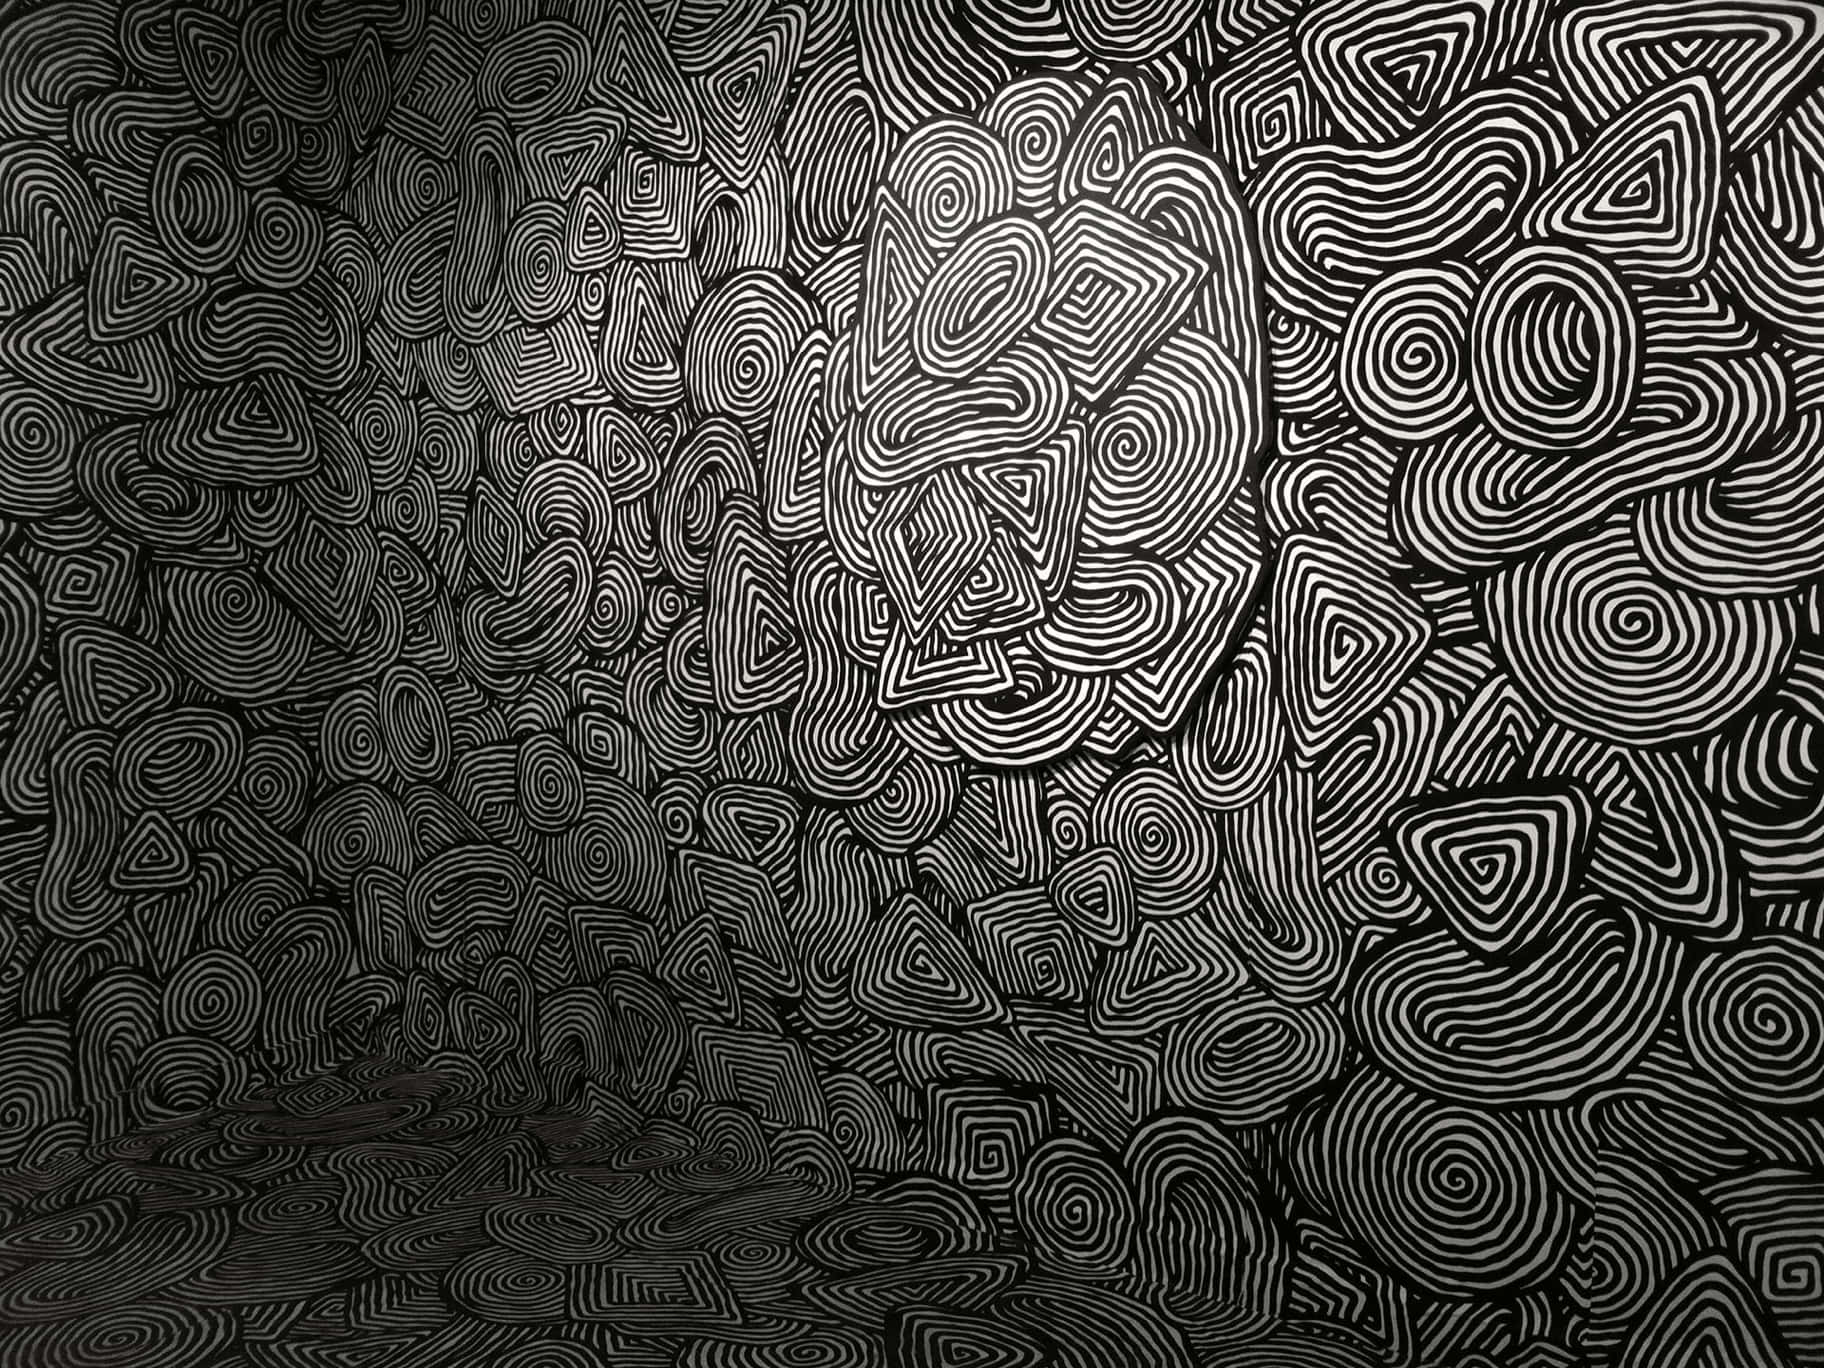 A Room With Black And White Swirls On The Wall